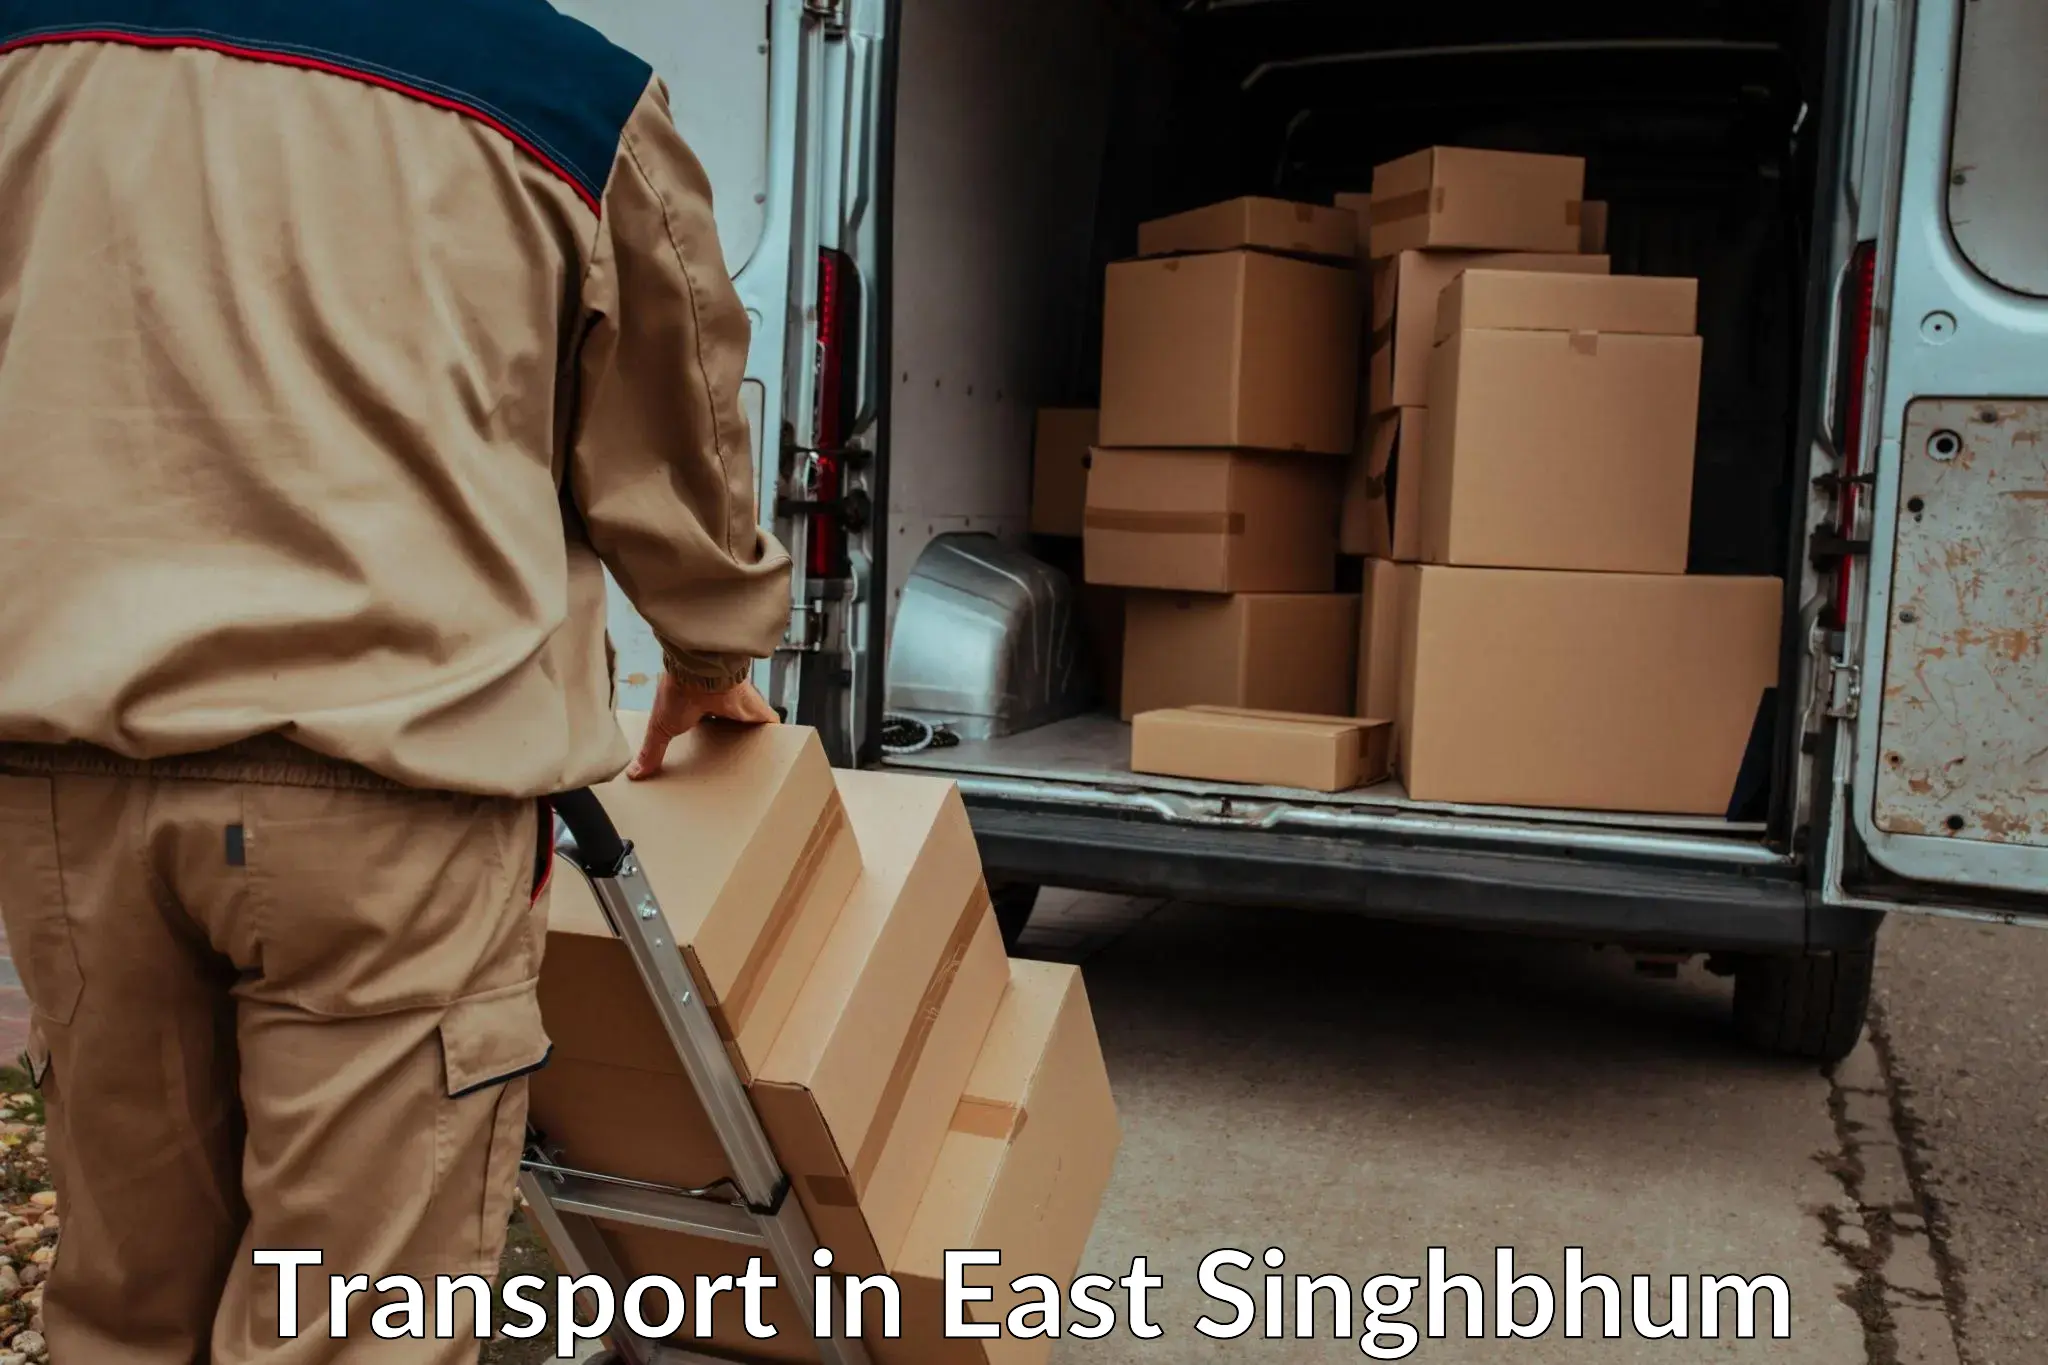 Luggage transport services in East Singhbhum